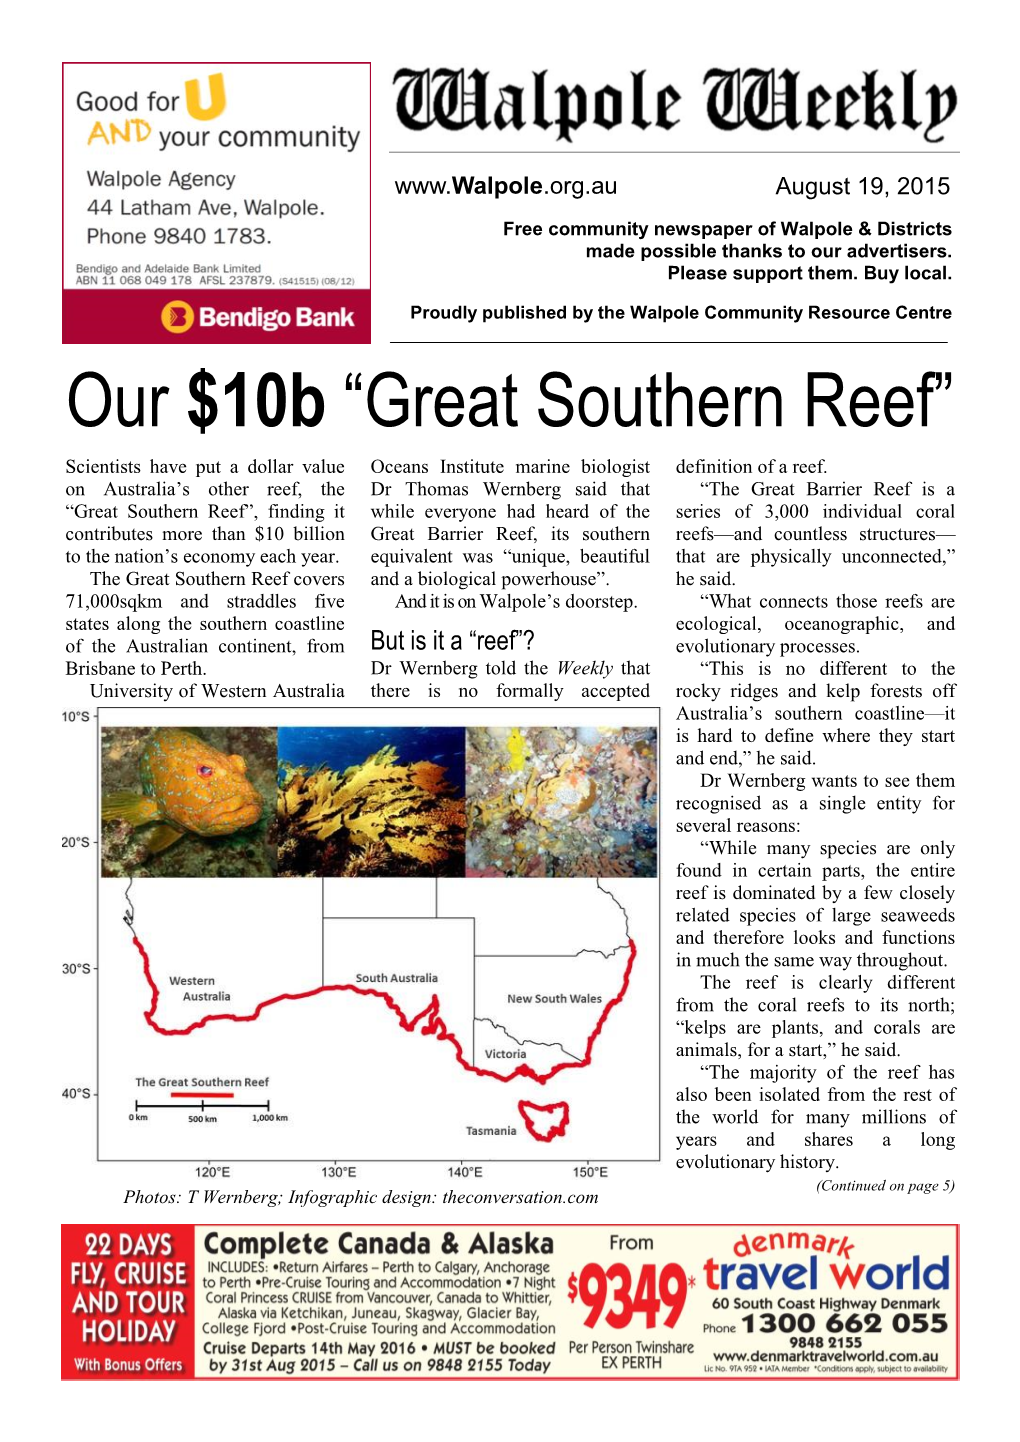 Great Southern Reef” Scientists Have Put a Dollar Value Oceans Institute Marine Biologist Definition of a Reef